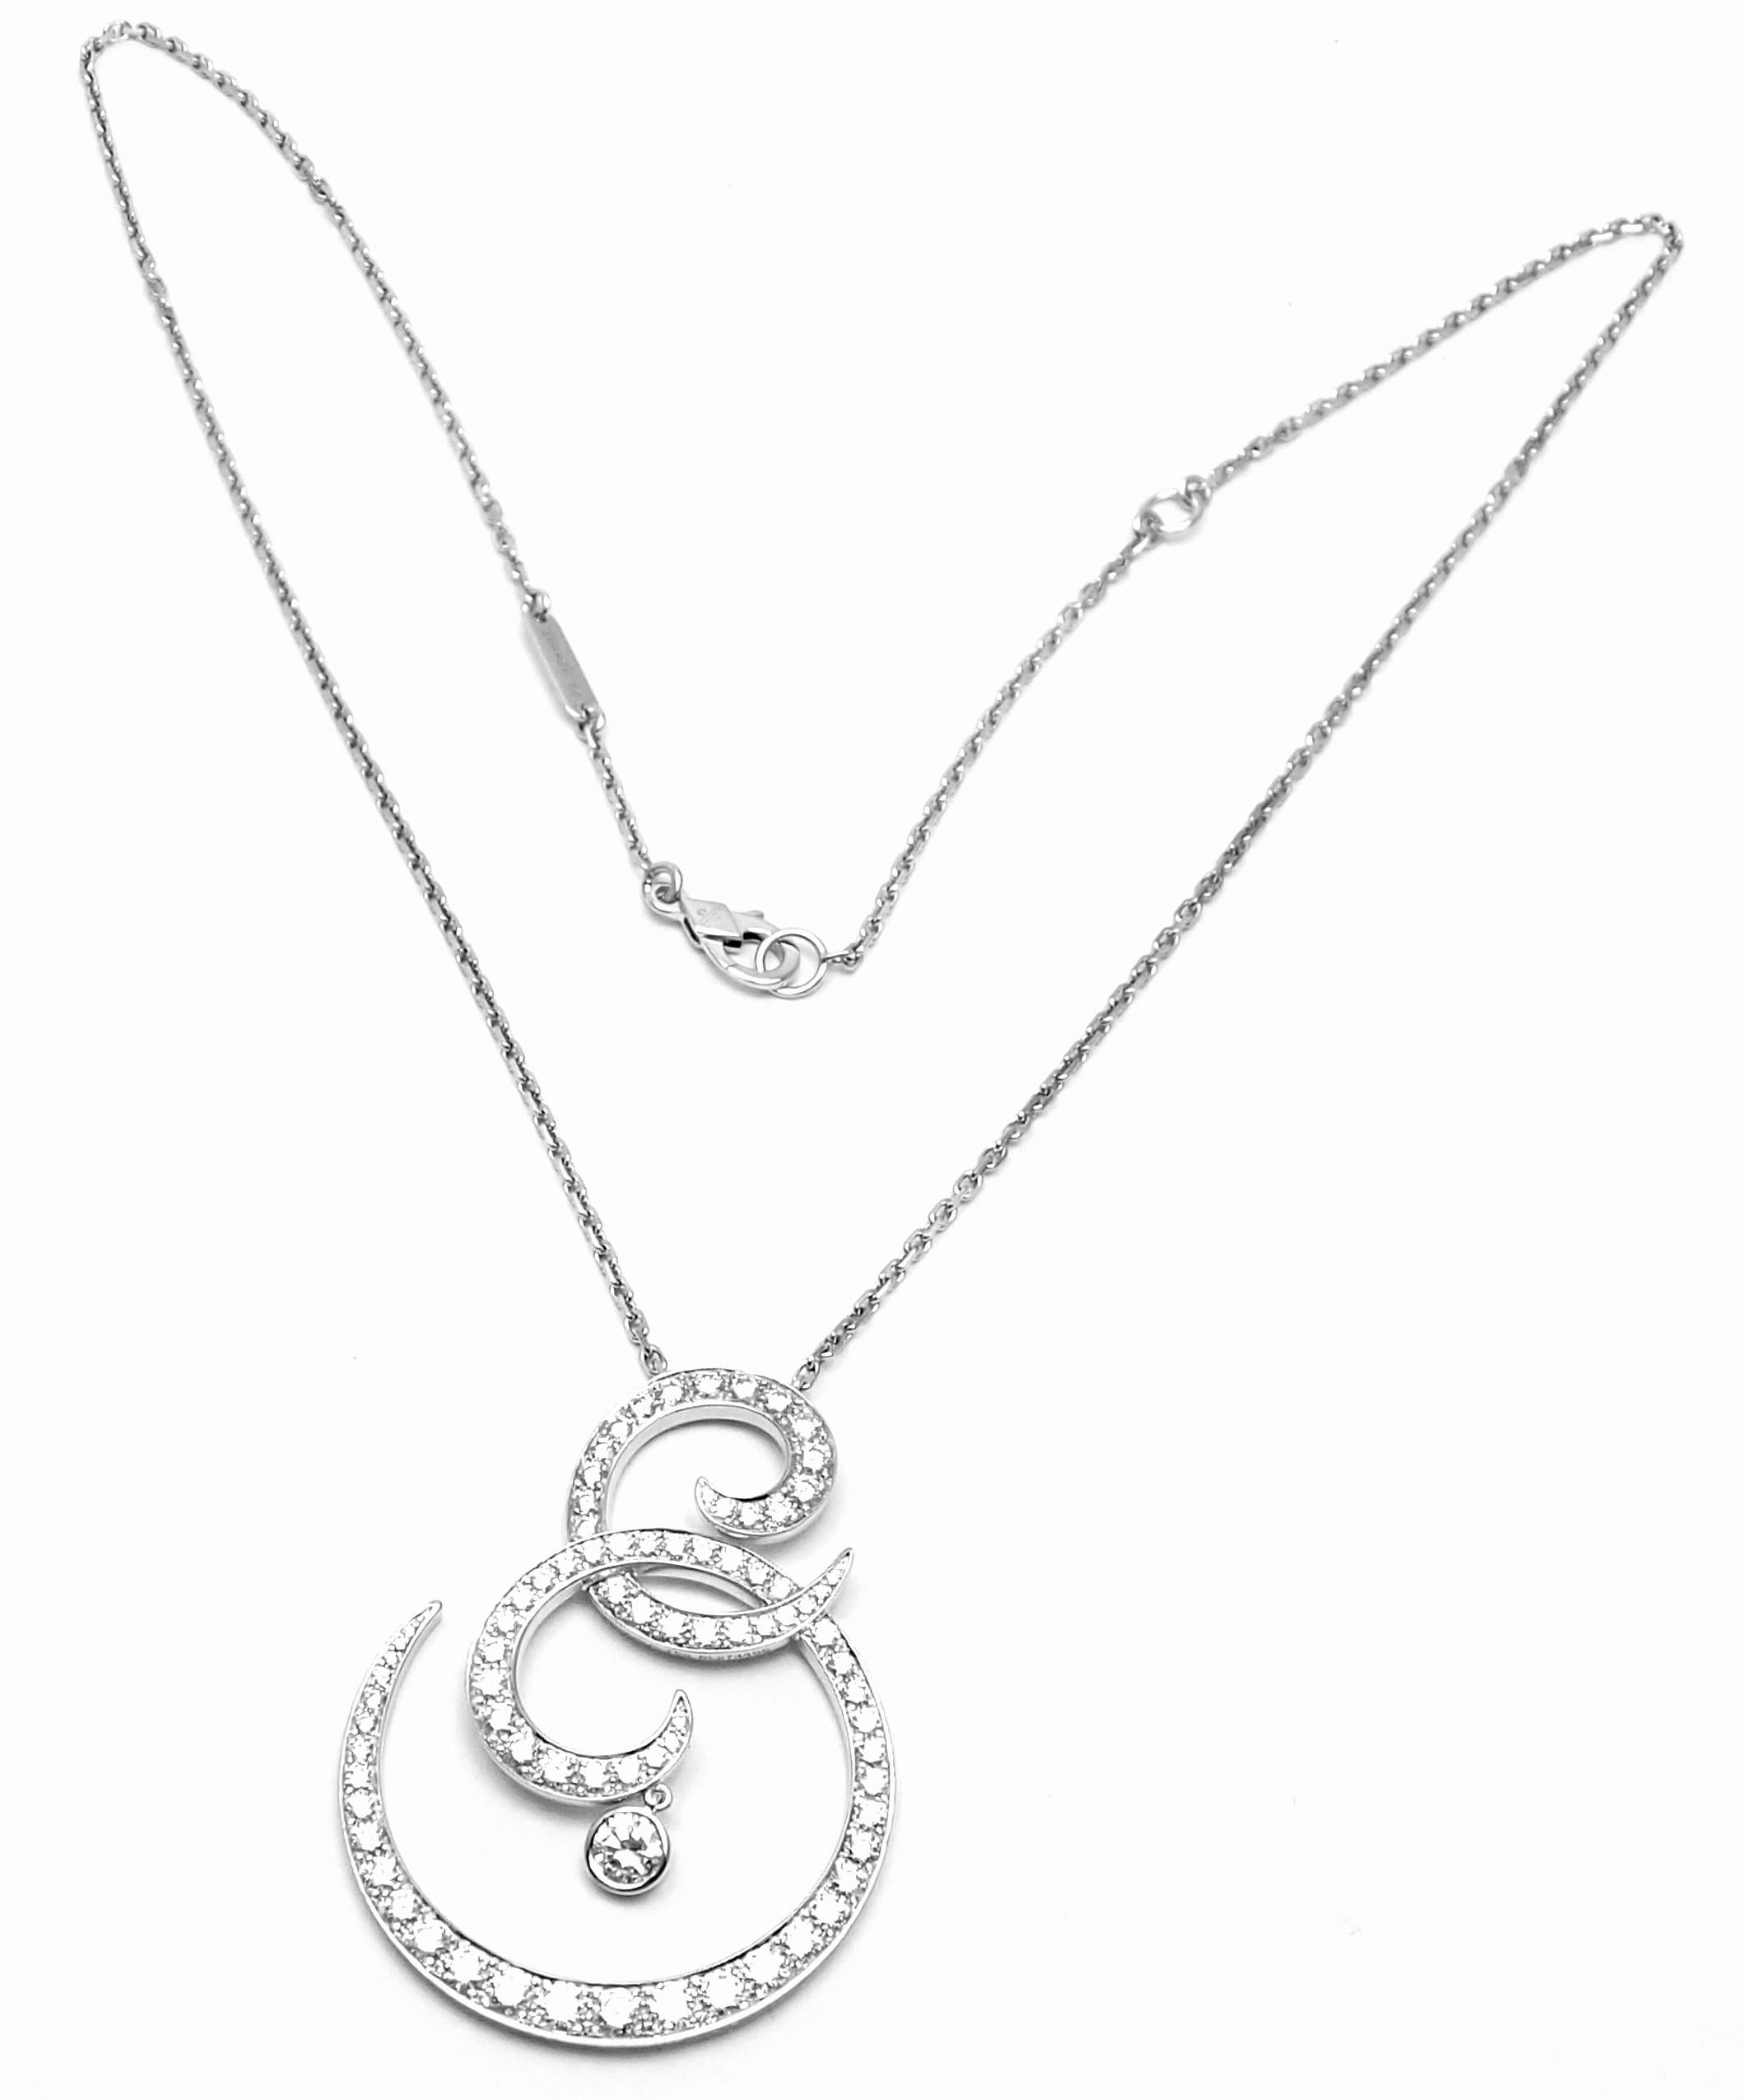 Platinum Diamond Oiseaux De Paradis Pendant Necklace by Van Cleef & Arpels
With Round brilliant cut diamonds VVS1 clarity, E color Total weight 1.65ct
This necklace comes with VCA box and service paper from VCA store.
Details: 
Length 16.5'', 15